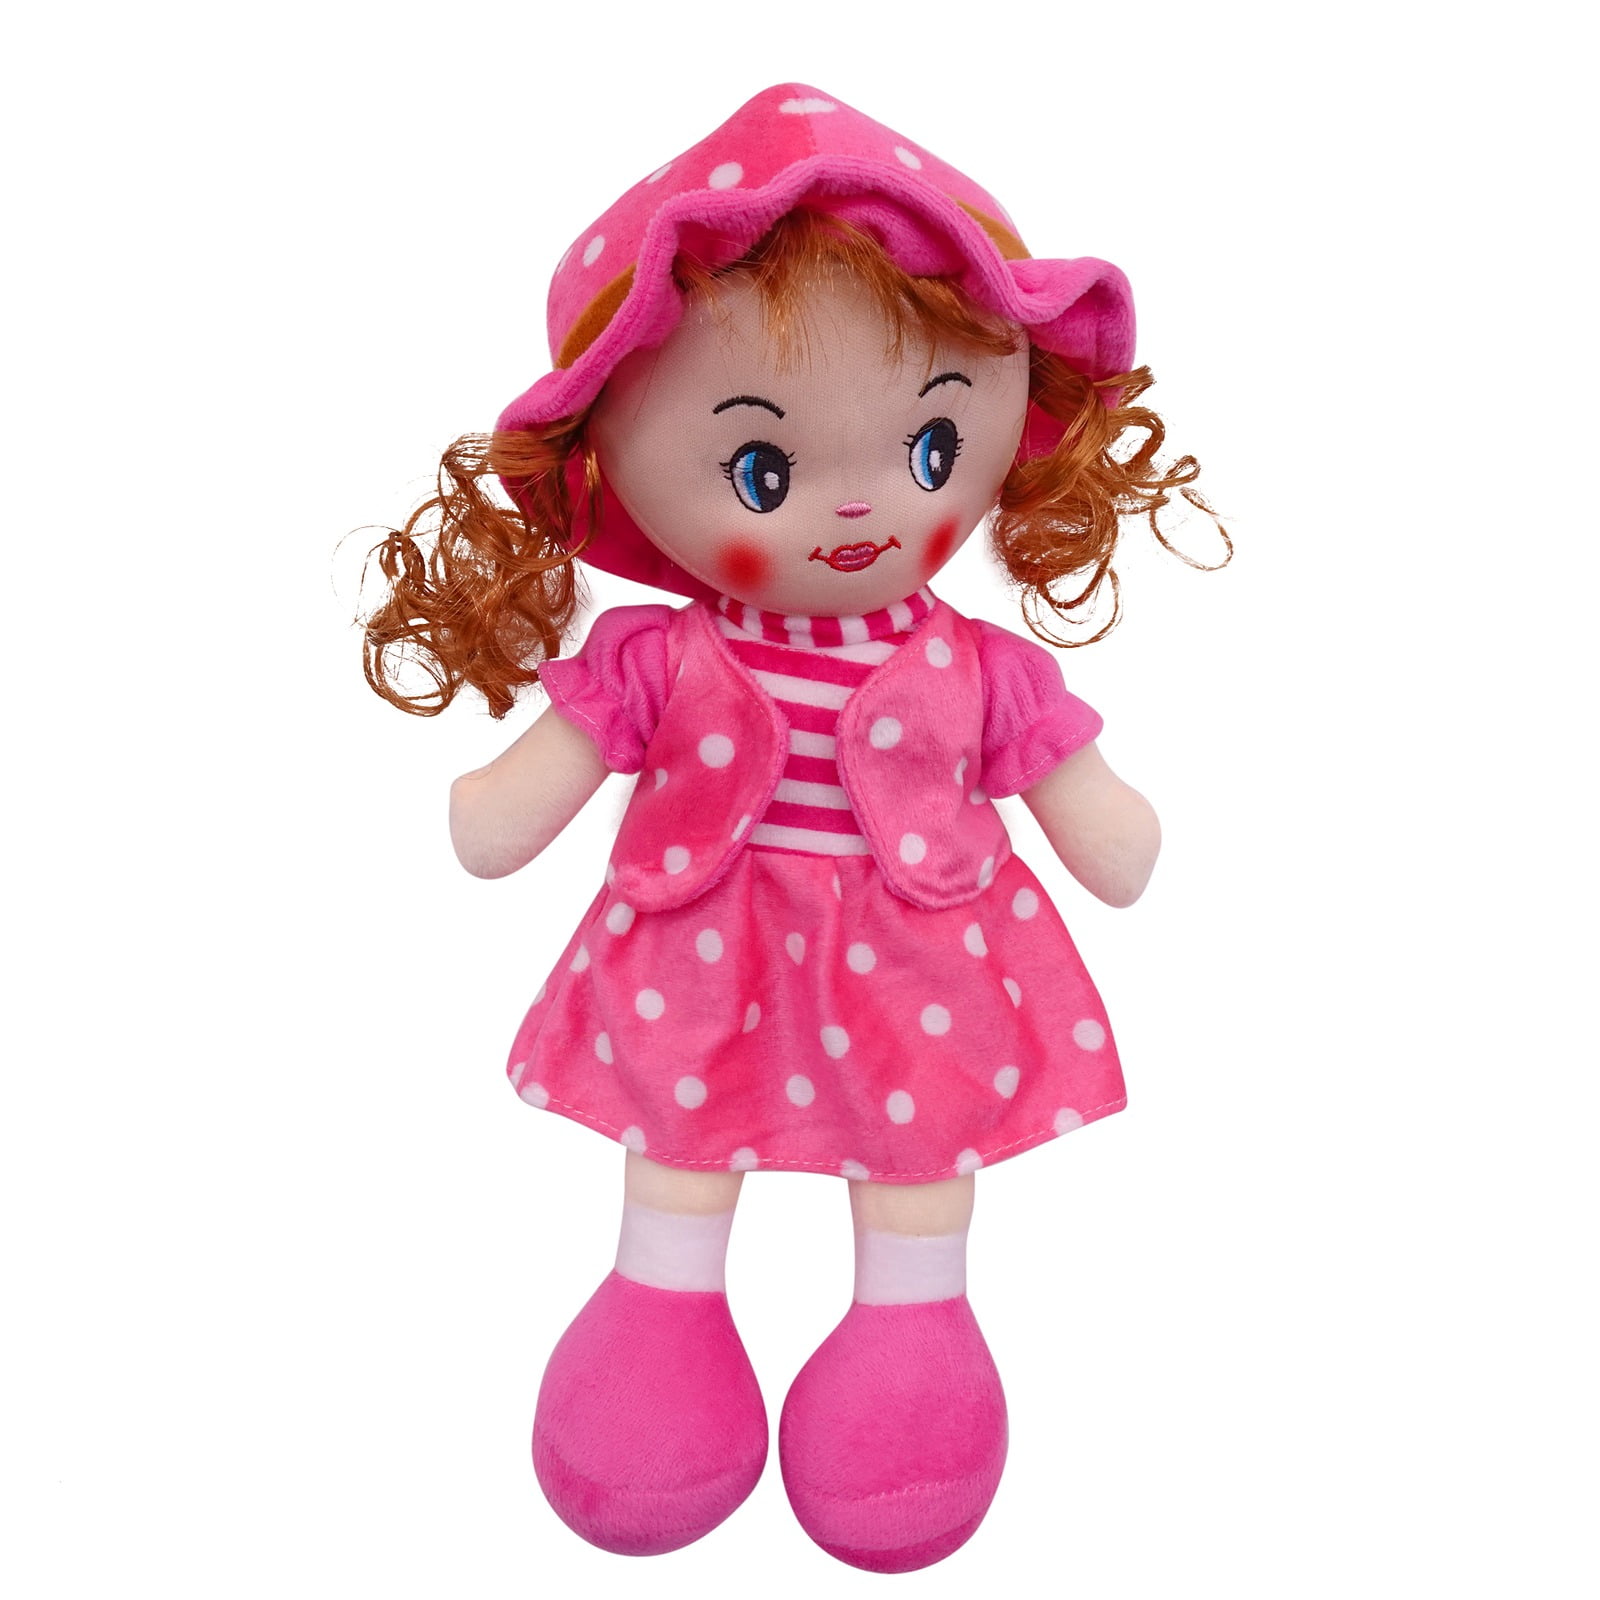 Happy Birthday Cute Little Pink Soft Toy Pocket Size Inspirational Doll Dolly 